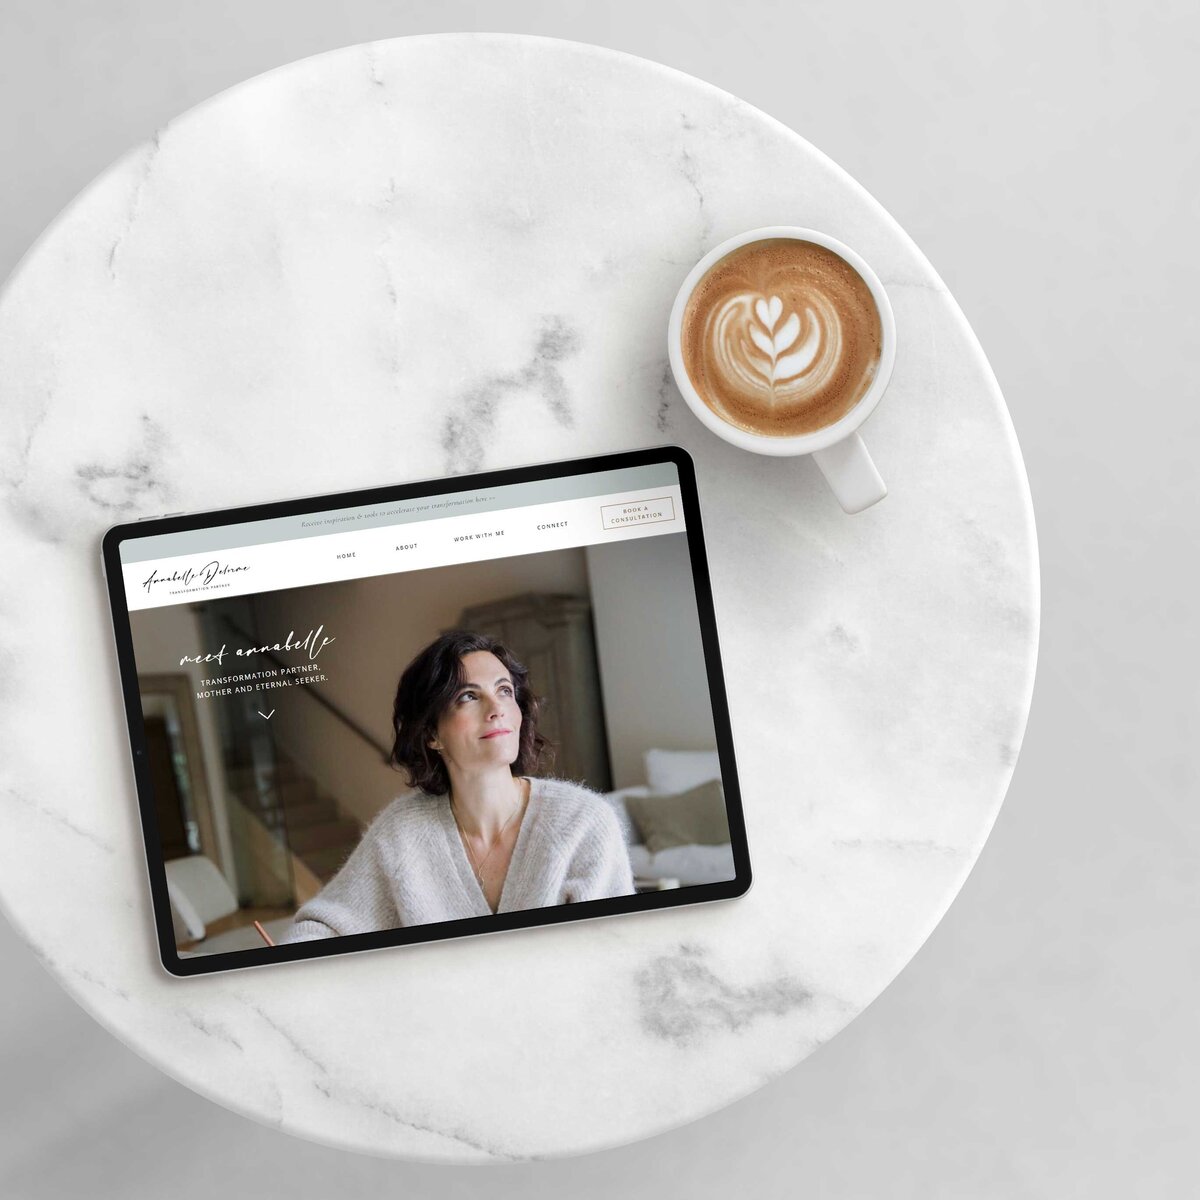 Tour Annabelle's full website, crafted to elevate her life coaching services with creativity and seamless website design solutions for creatives.